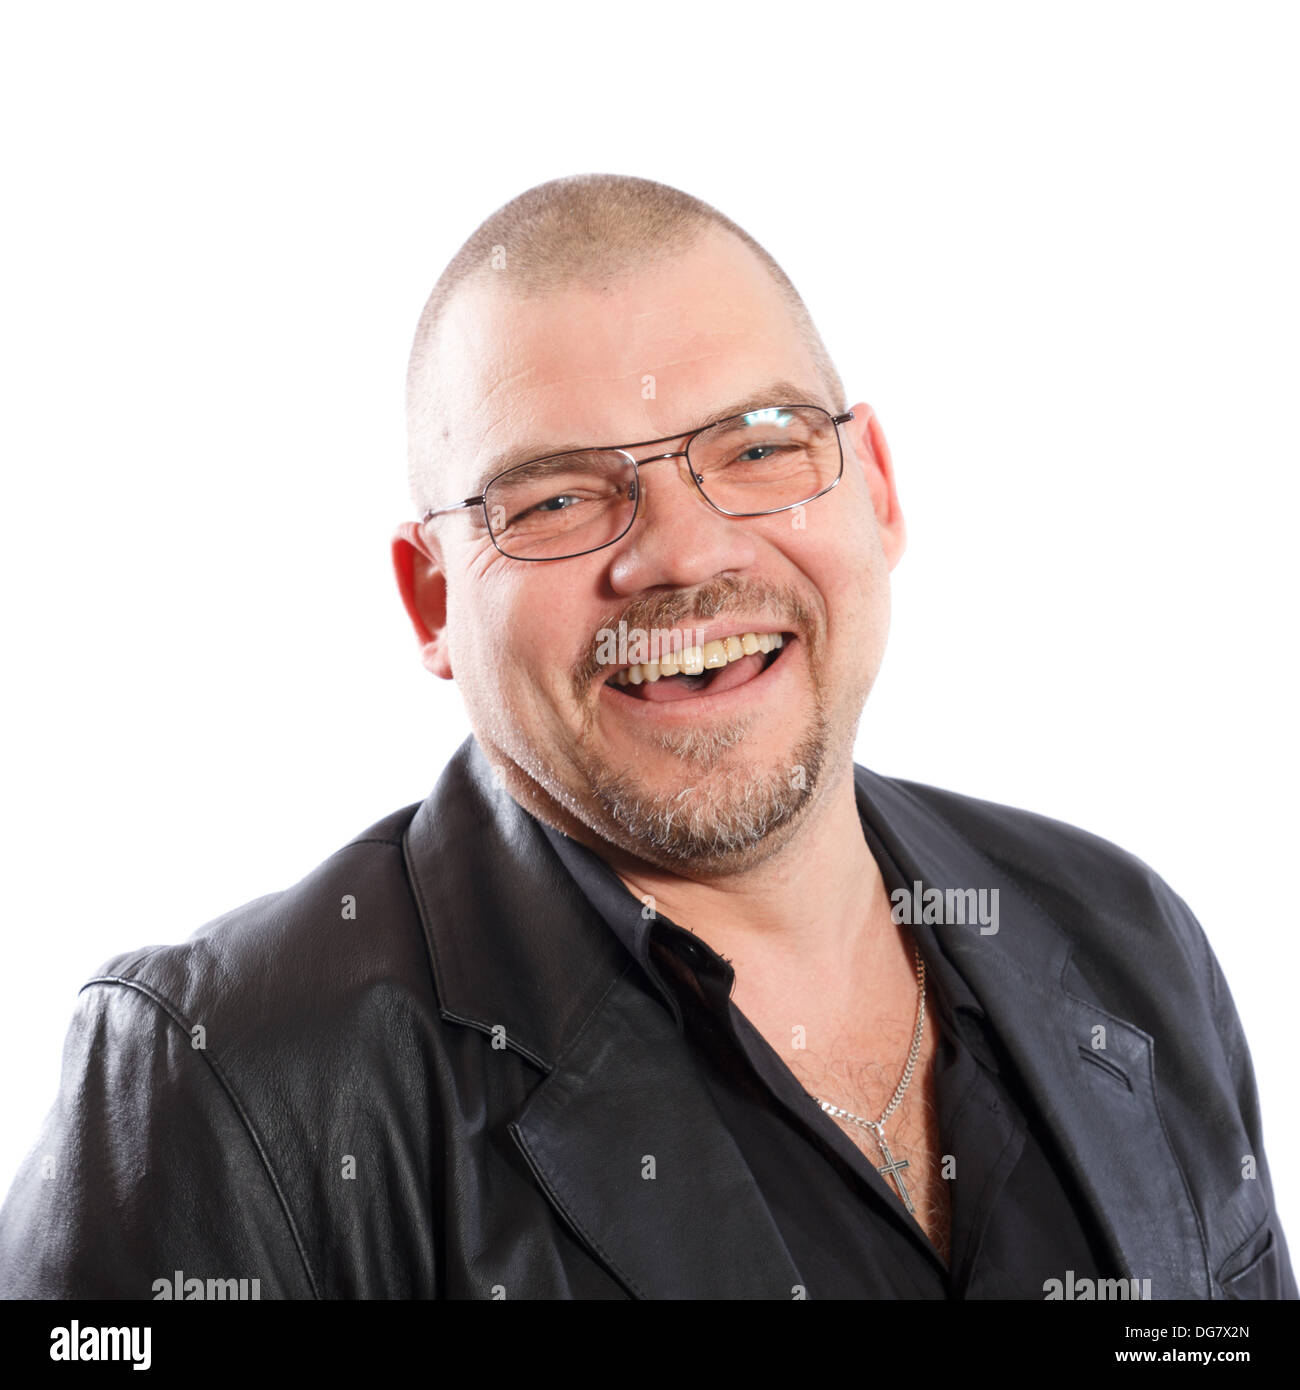 smiling man with glasses without hair on a white background Stock Photo